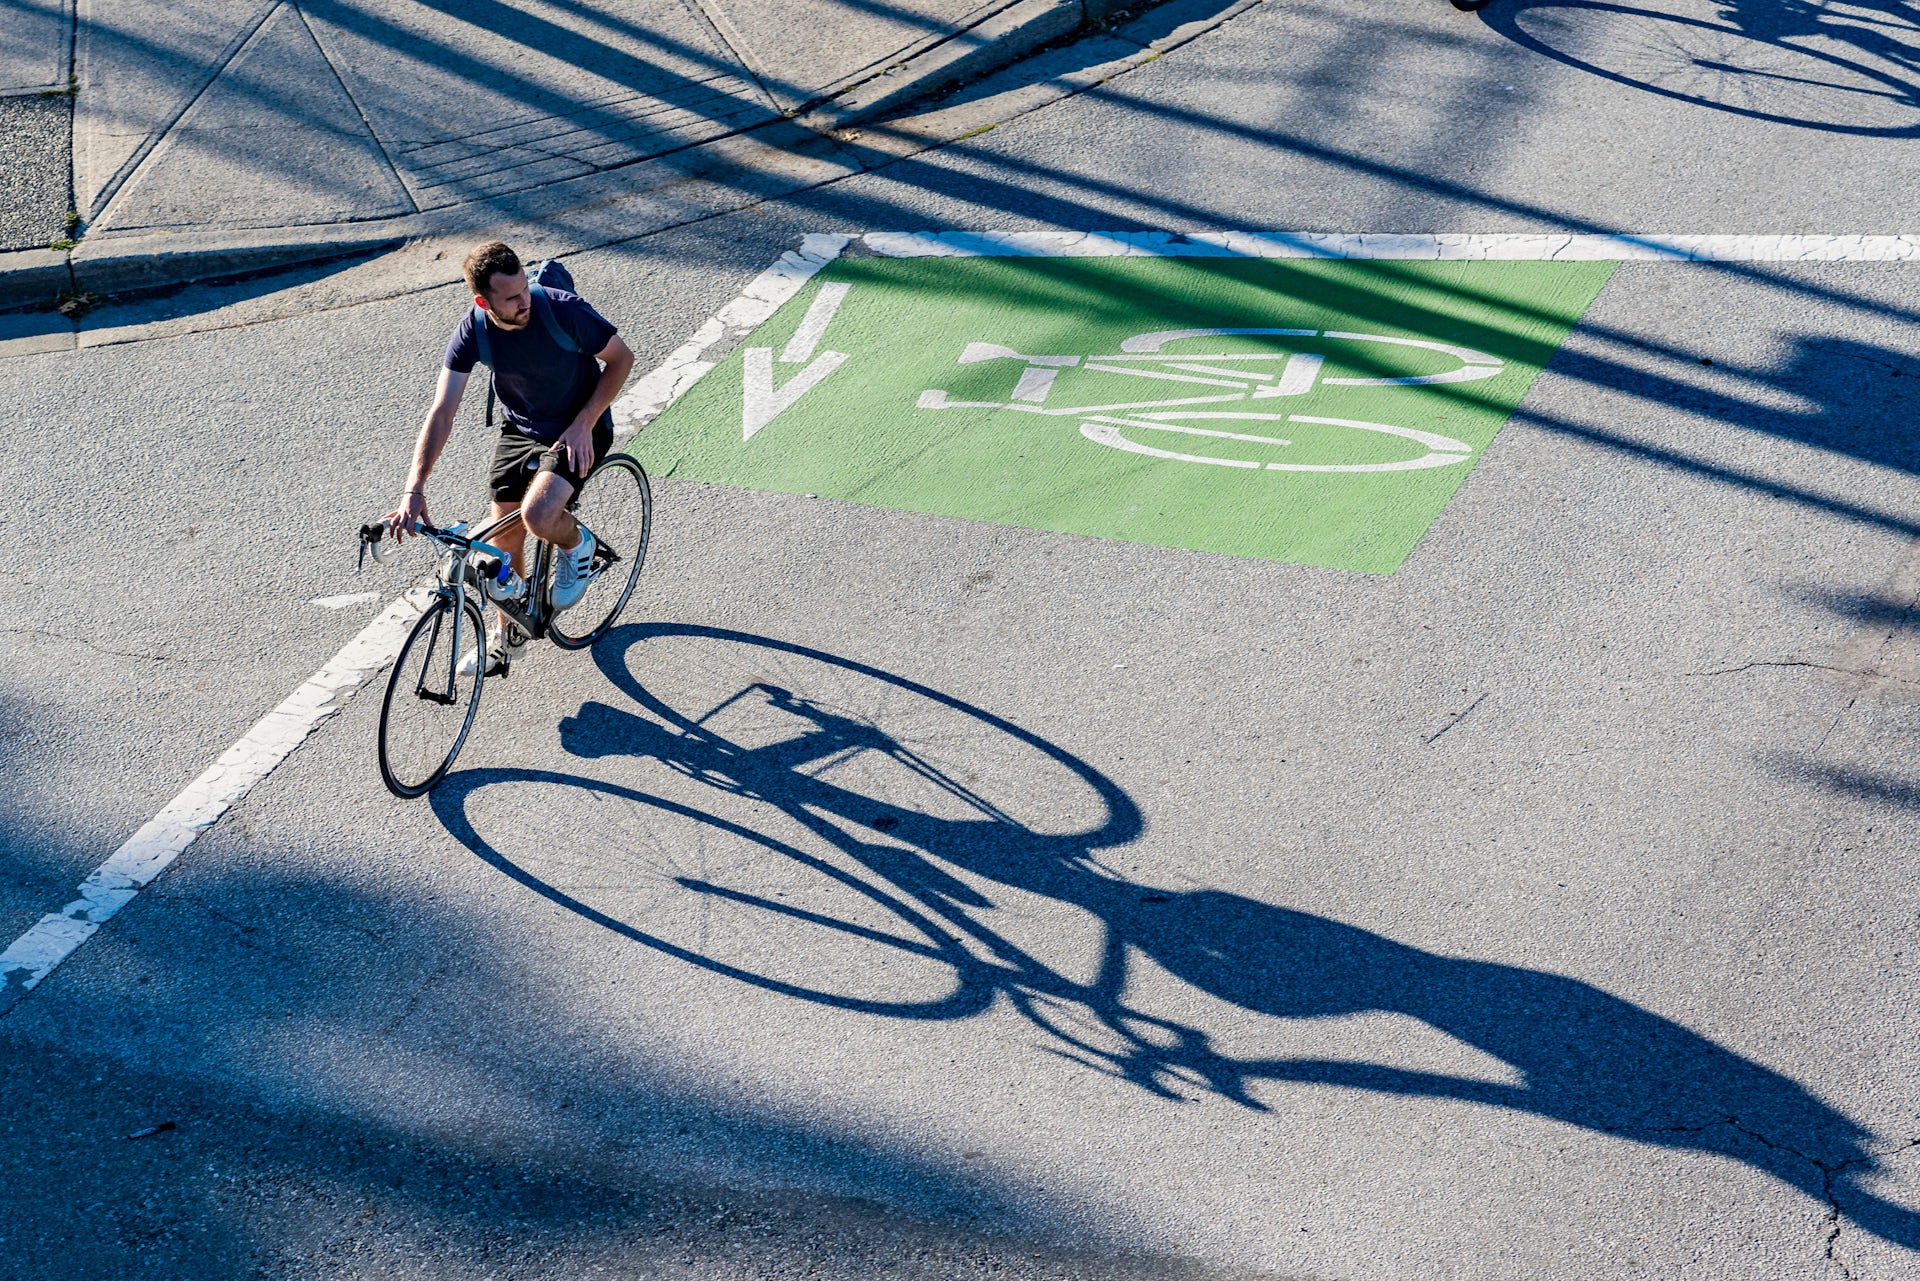 Cyclist on a road with a cyclist sign painted on it, throwing a large shadow